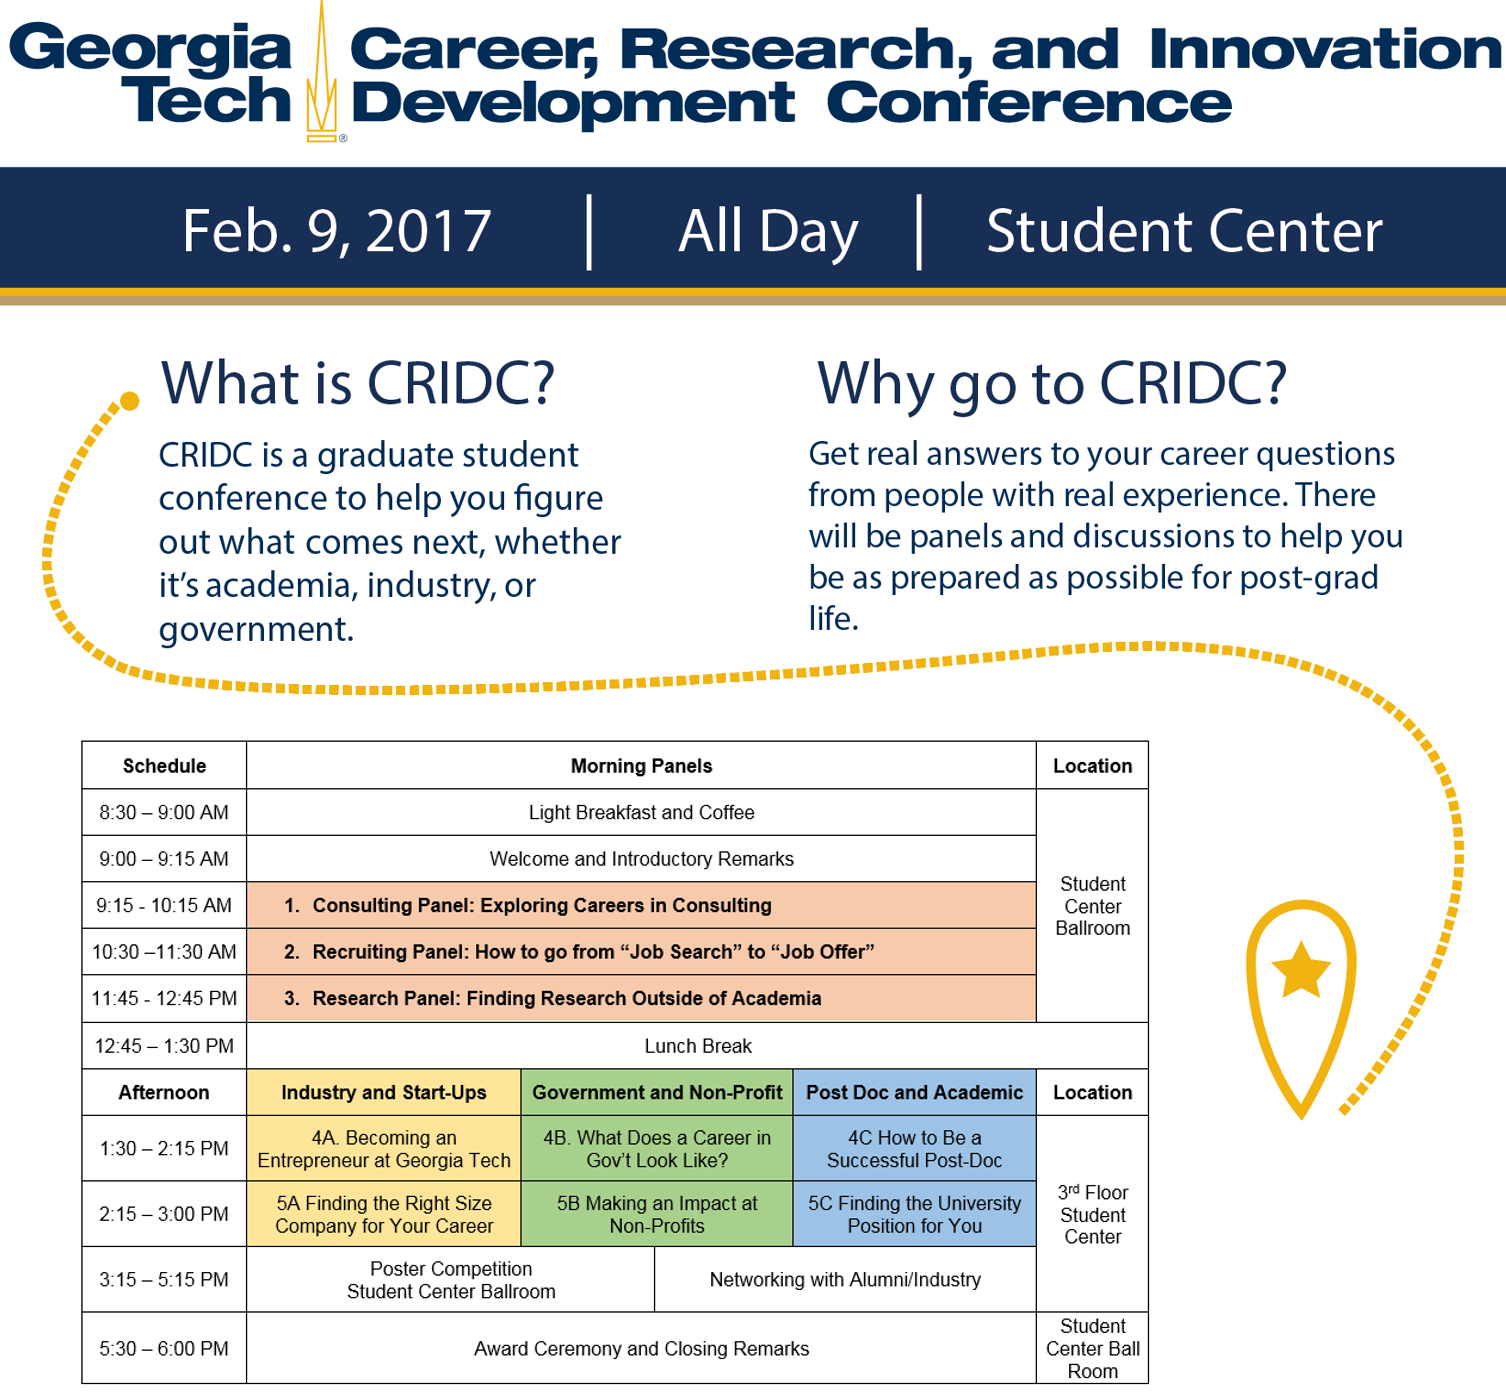 The Career, Research, and Innovation Development Conference (CRIDC) will be held February 9, 2017 in the Student Center Ballroom.